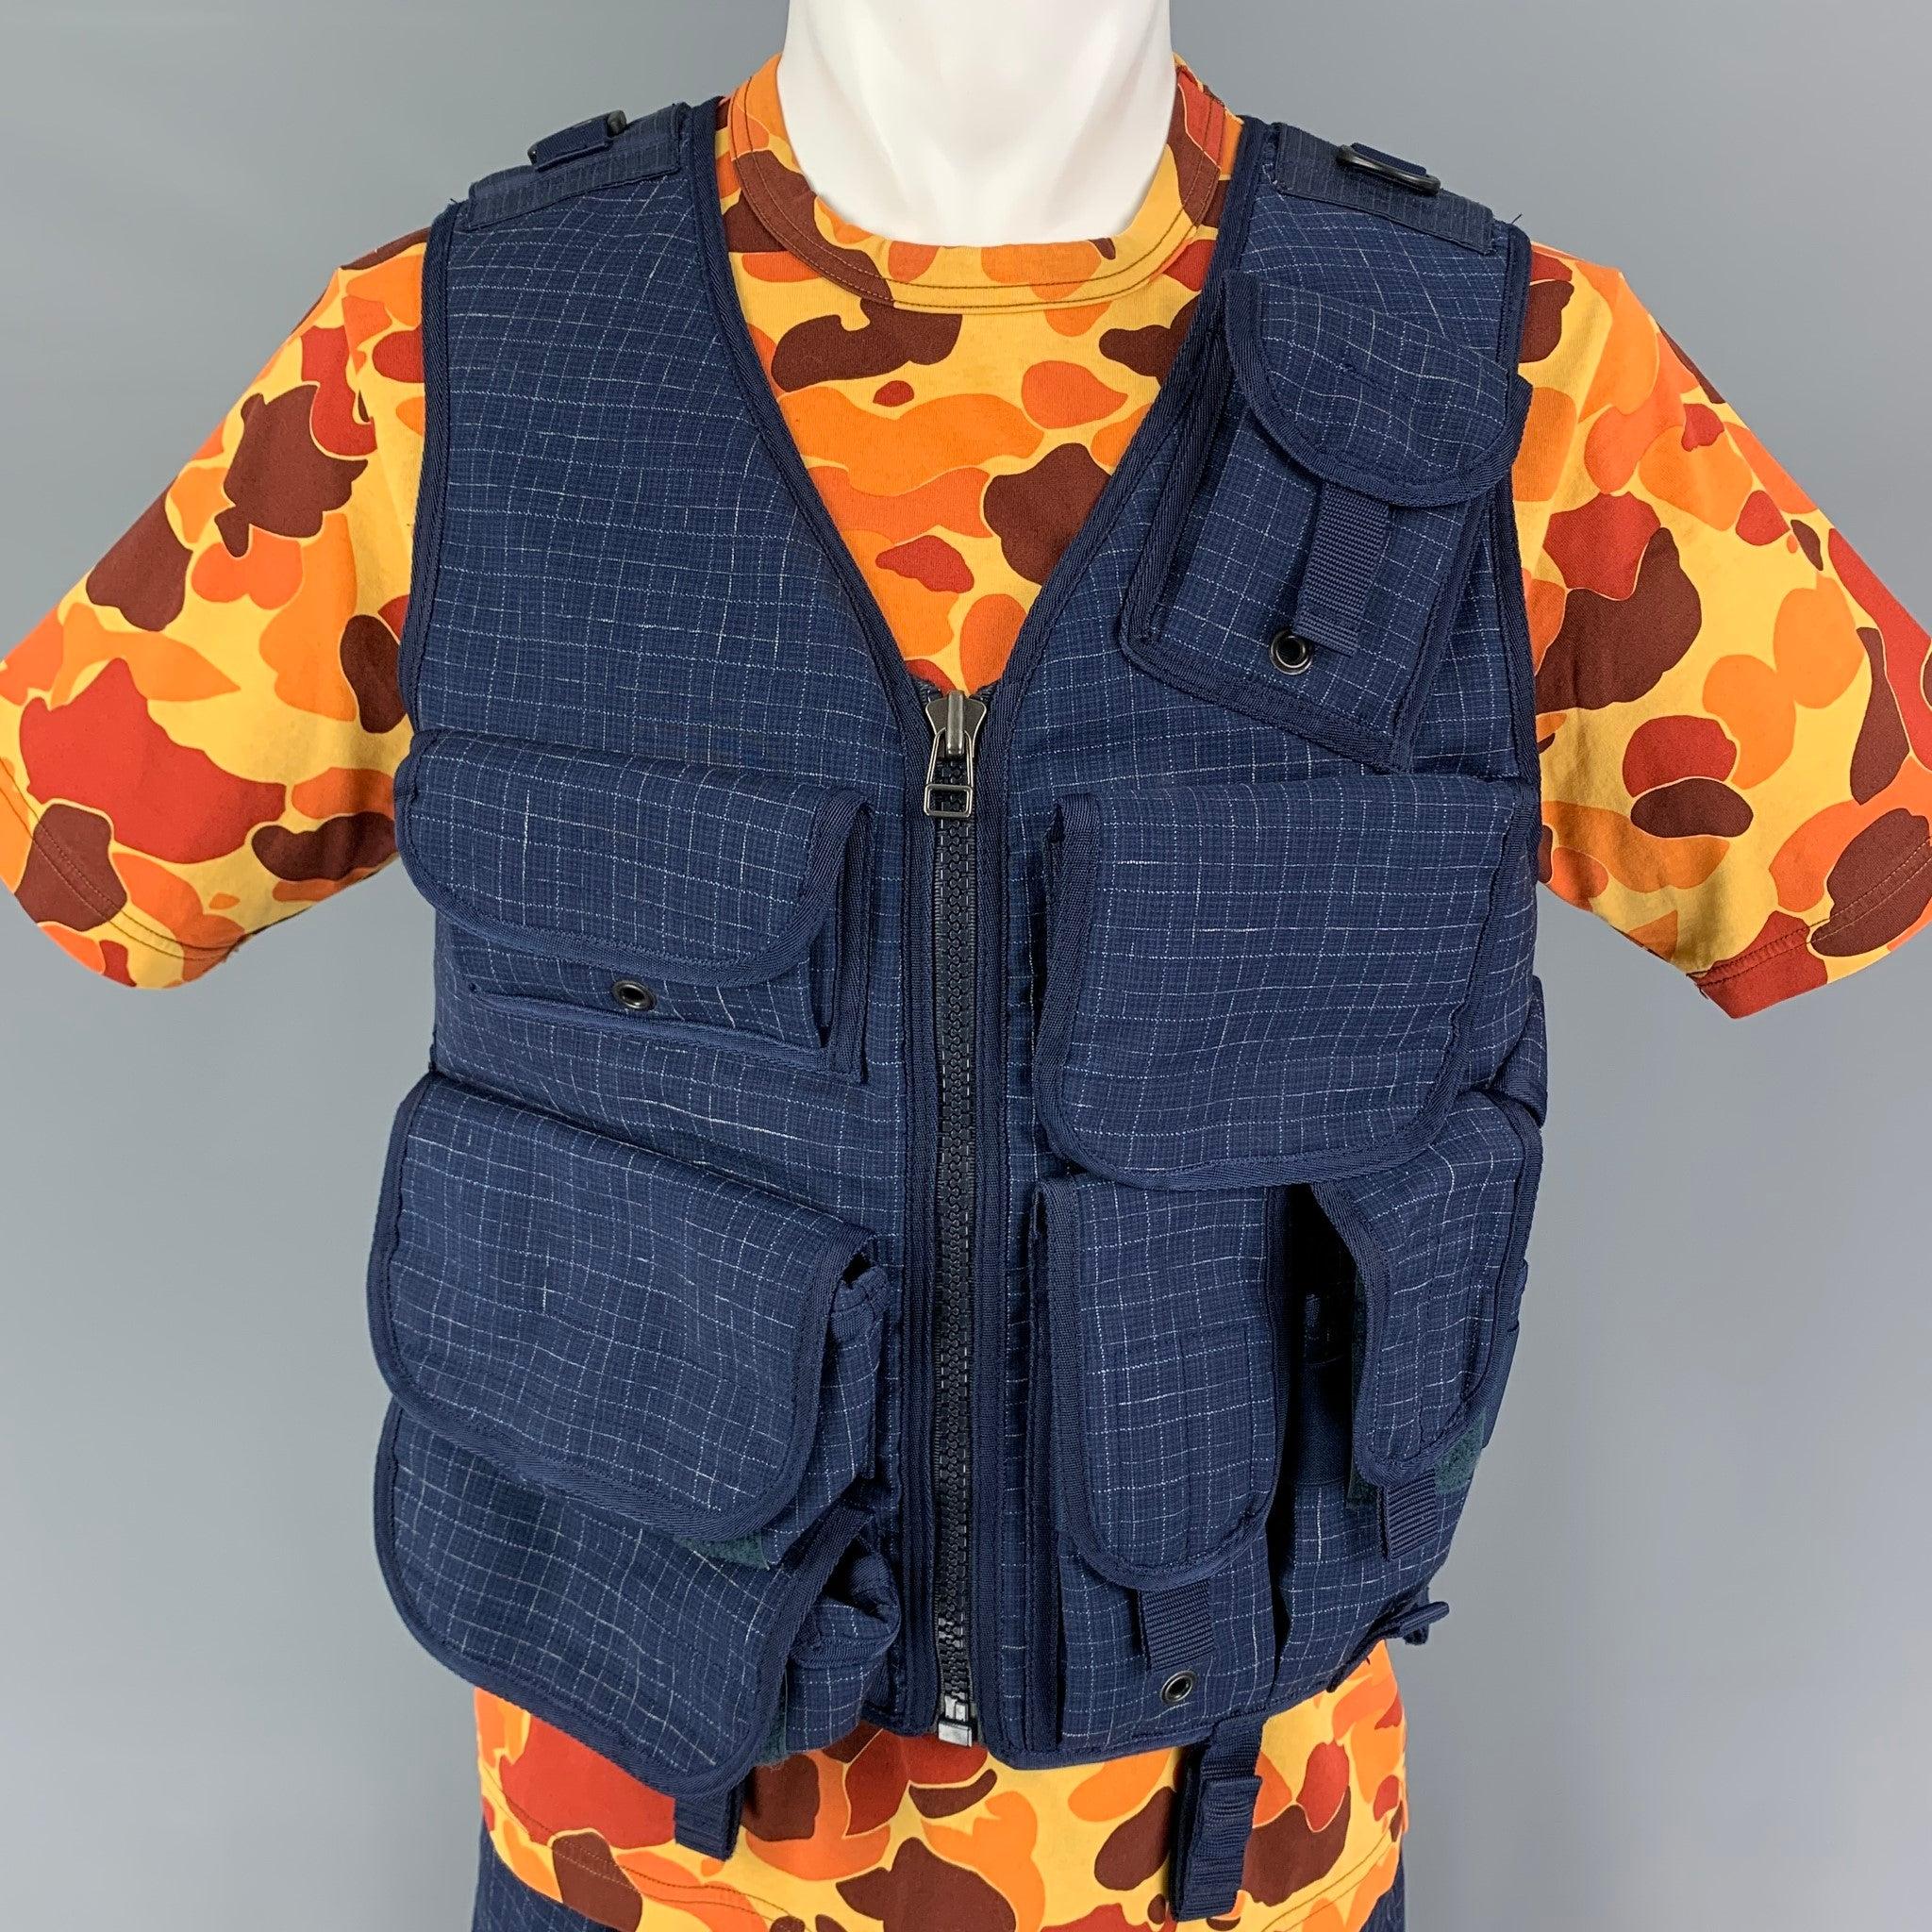 JUNYA WATANABE x Ark Air SS19 3 Piece Set comes in a blue checked print mixed materials with a camouflage print interior utility vest featuring hook & loop shoulder straps, 8 flap pockets, three internal pockets, metal eyelets, side adjusters, zip